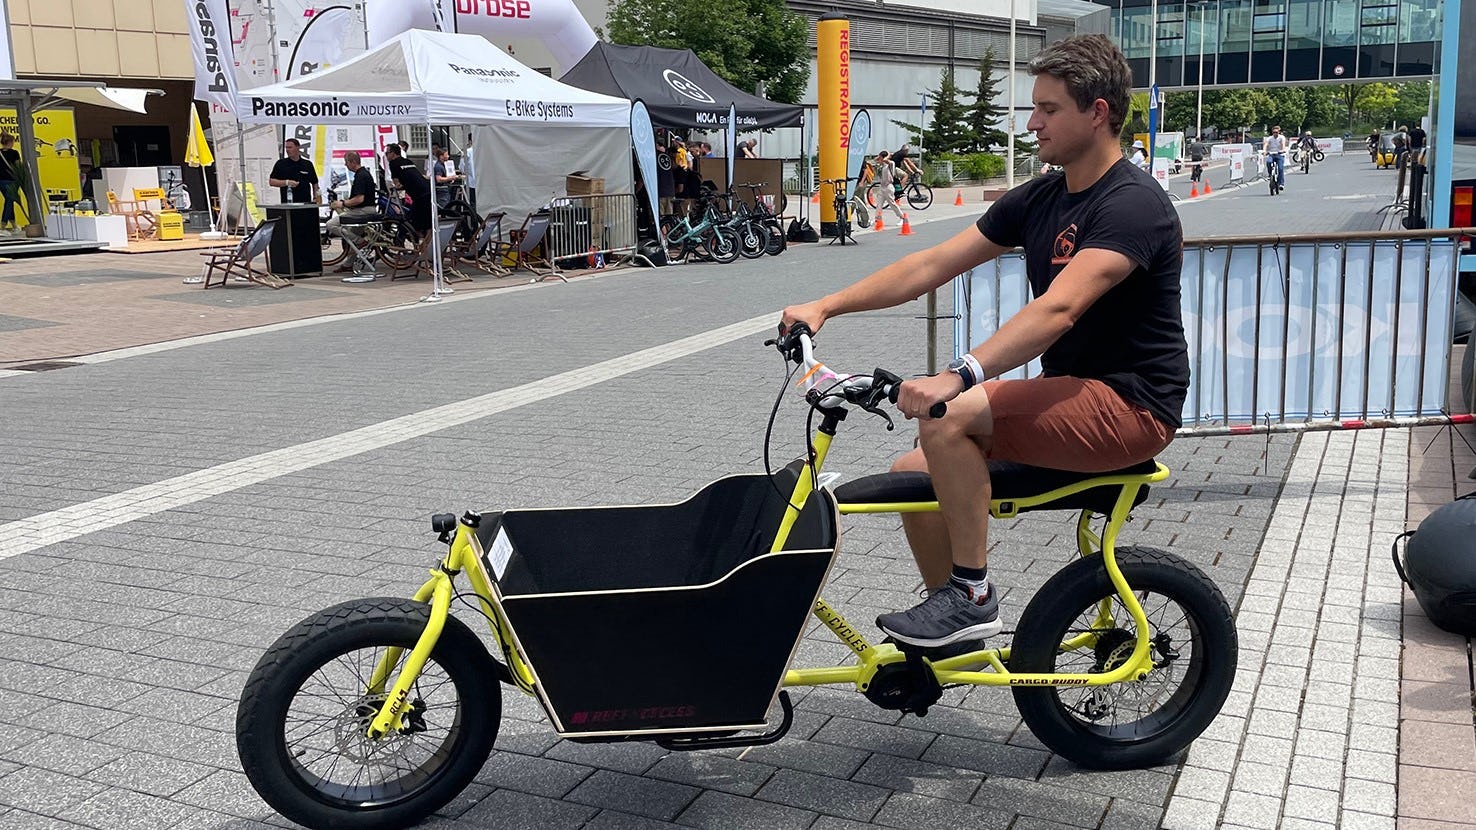 A fat bike cargo bike? Yes, the Cargo Buddy from Ruff cycles on the Eurobike test track. Photos Peter van der Weer